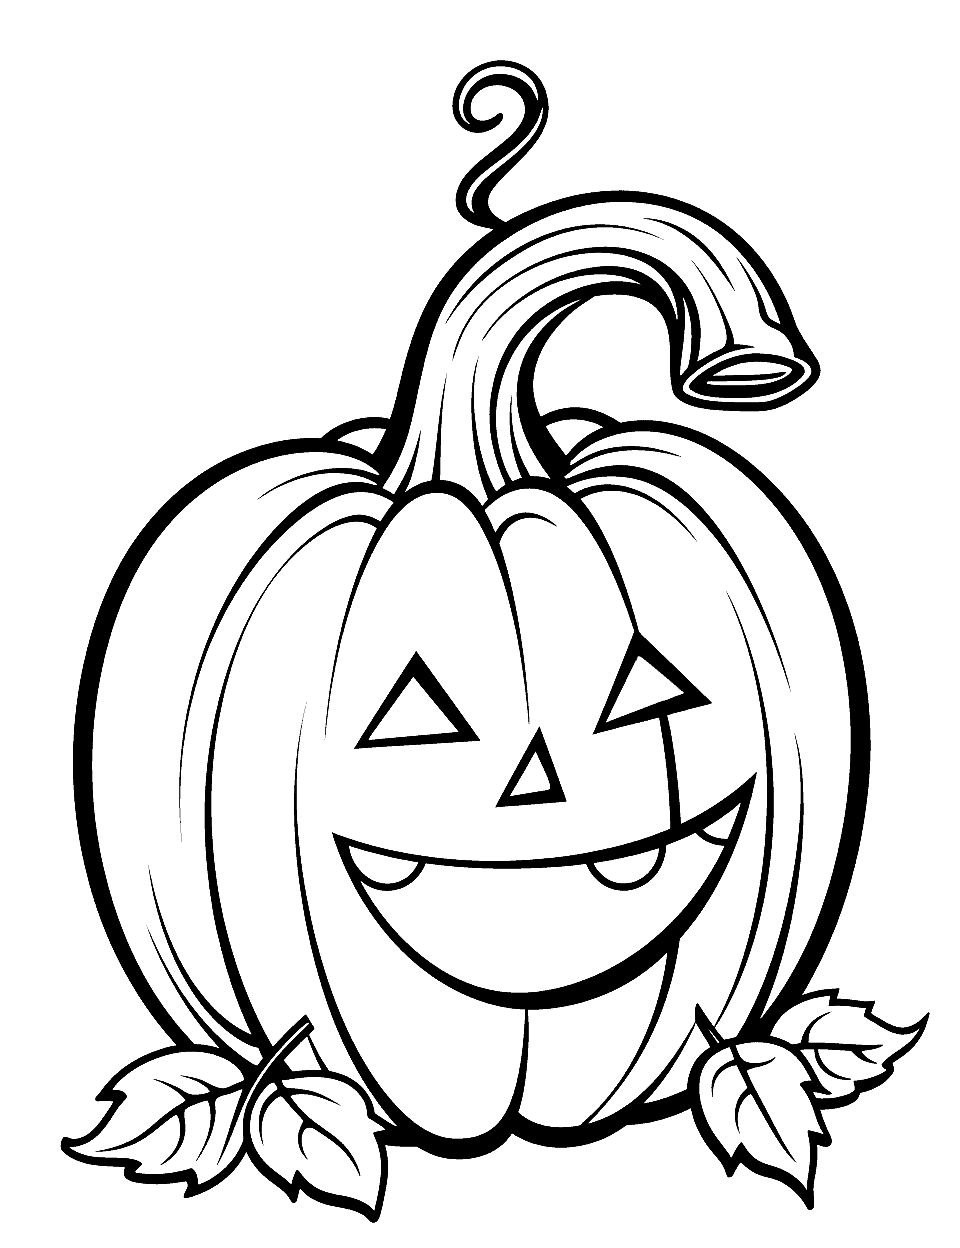 Large Halloween Pumpkin Coloring Page - A big, cheerful pumpkin taking up most of the page, perfect for younger children or those with motor skill difficulties.